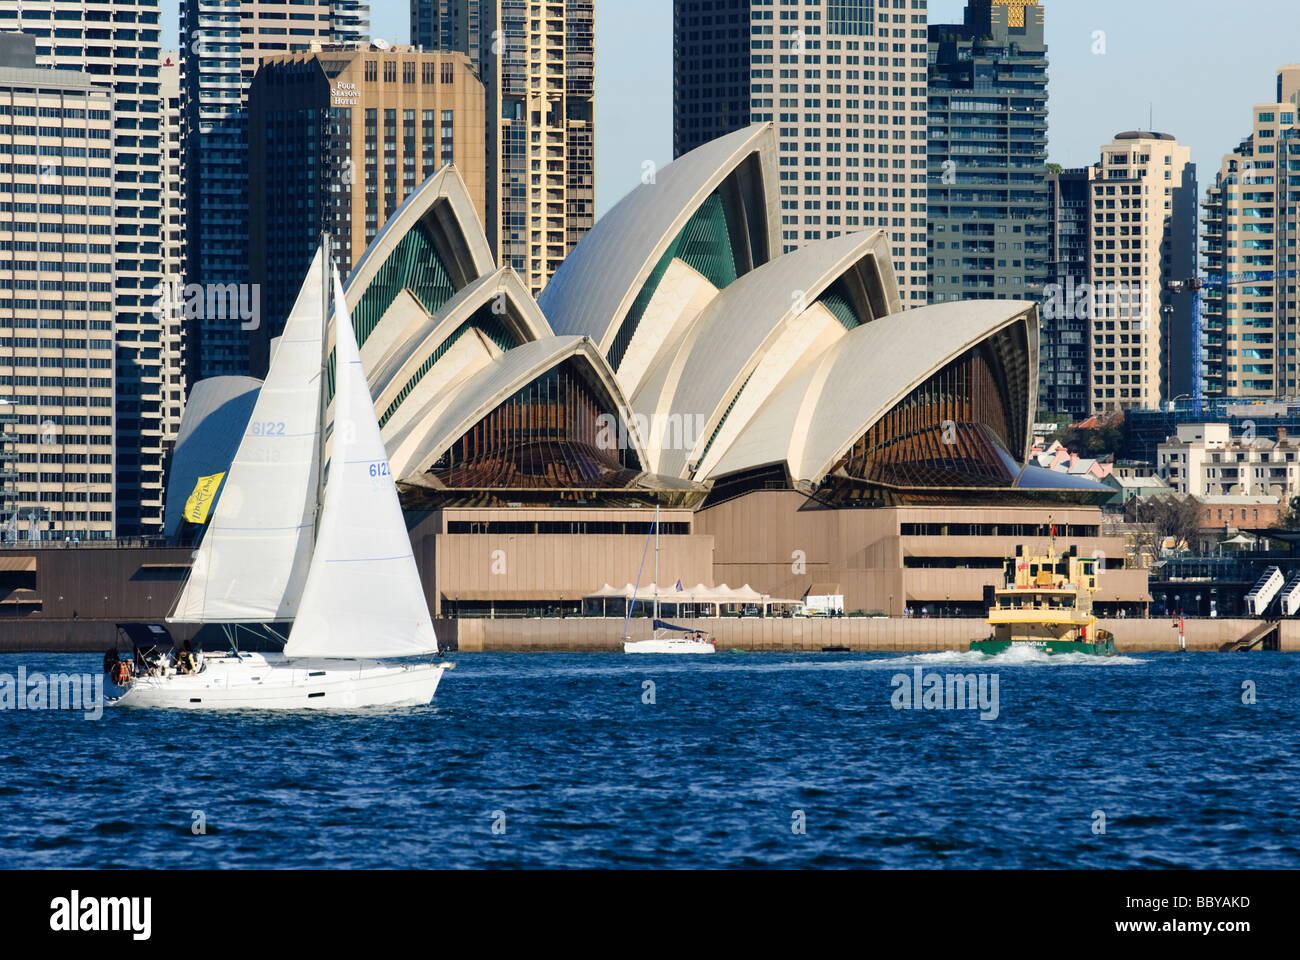 Yacht with white sails and other boats on the blue water of Sydney Harbor, sailing past Sydney Opera House. Stock Photo